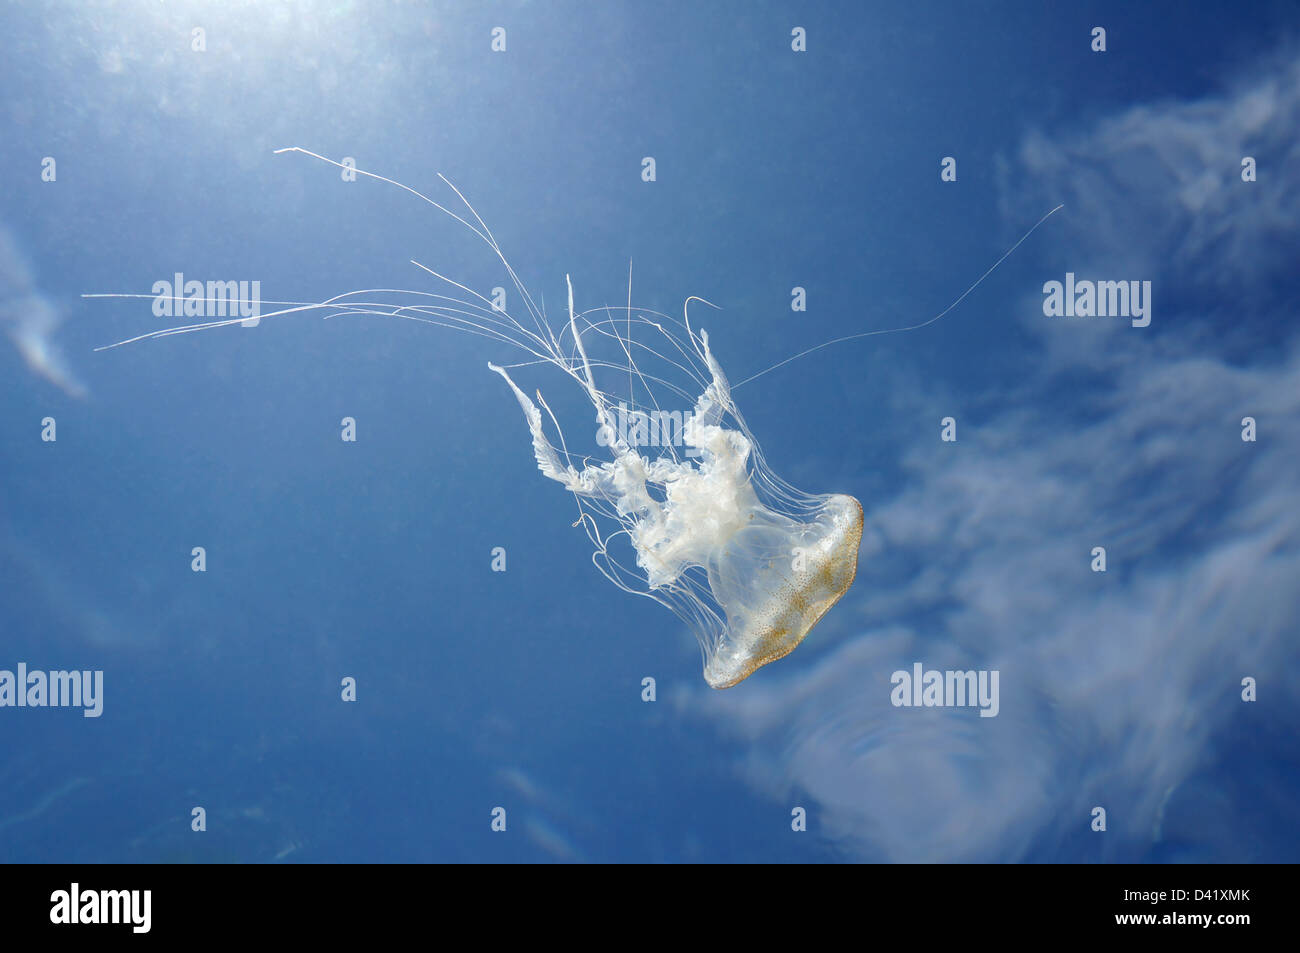 Underwater view of water surface with a Warty jellyfish and blue sky with clouds in background Stock Photo